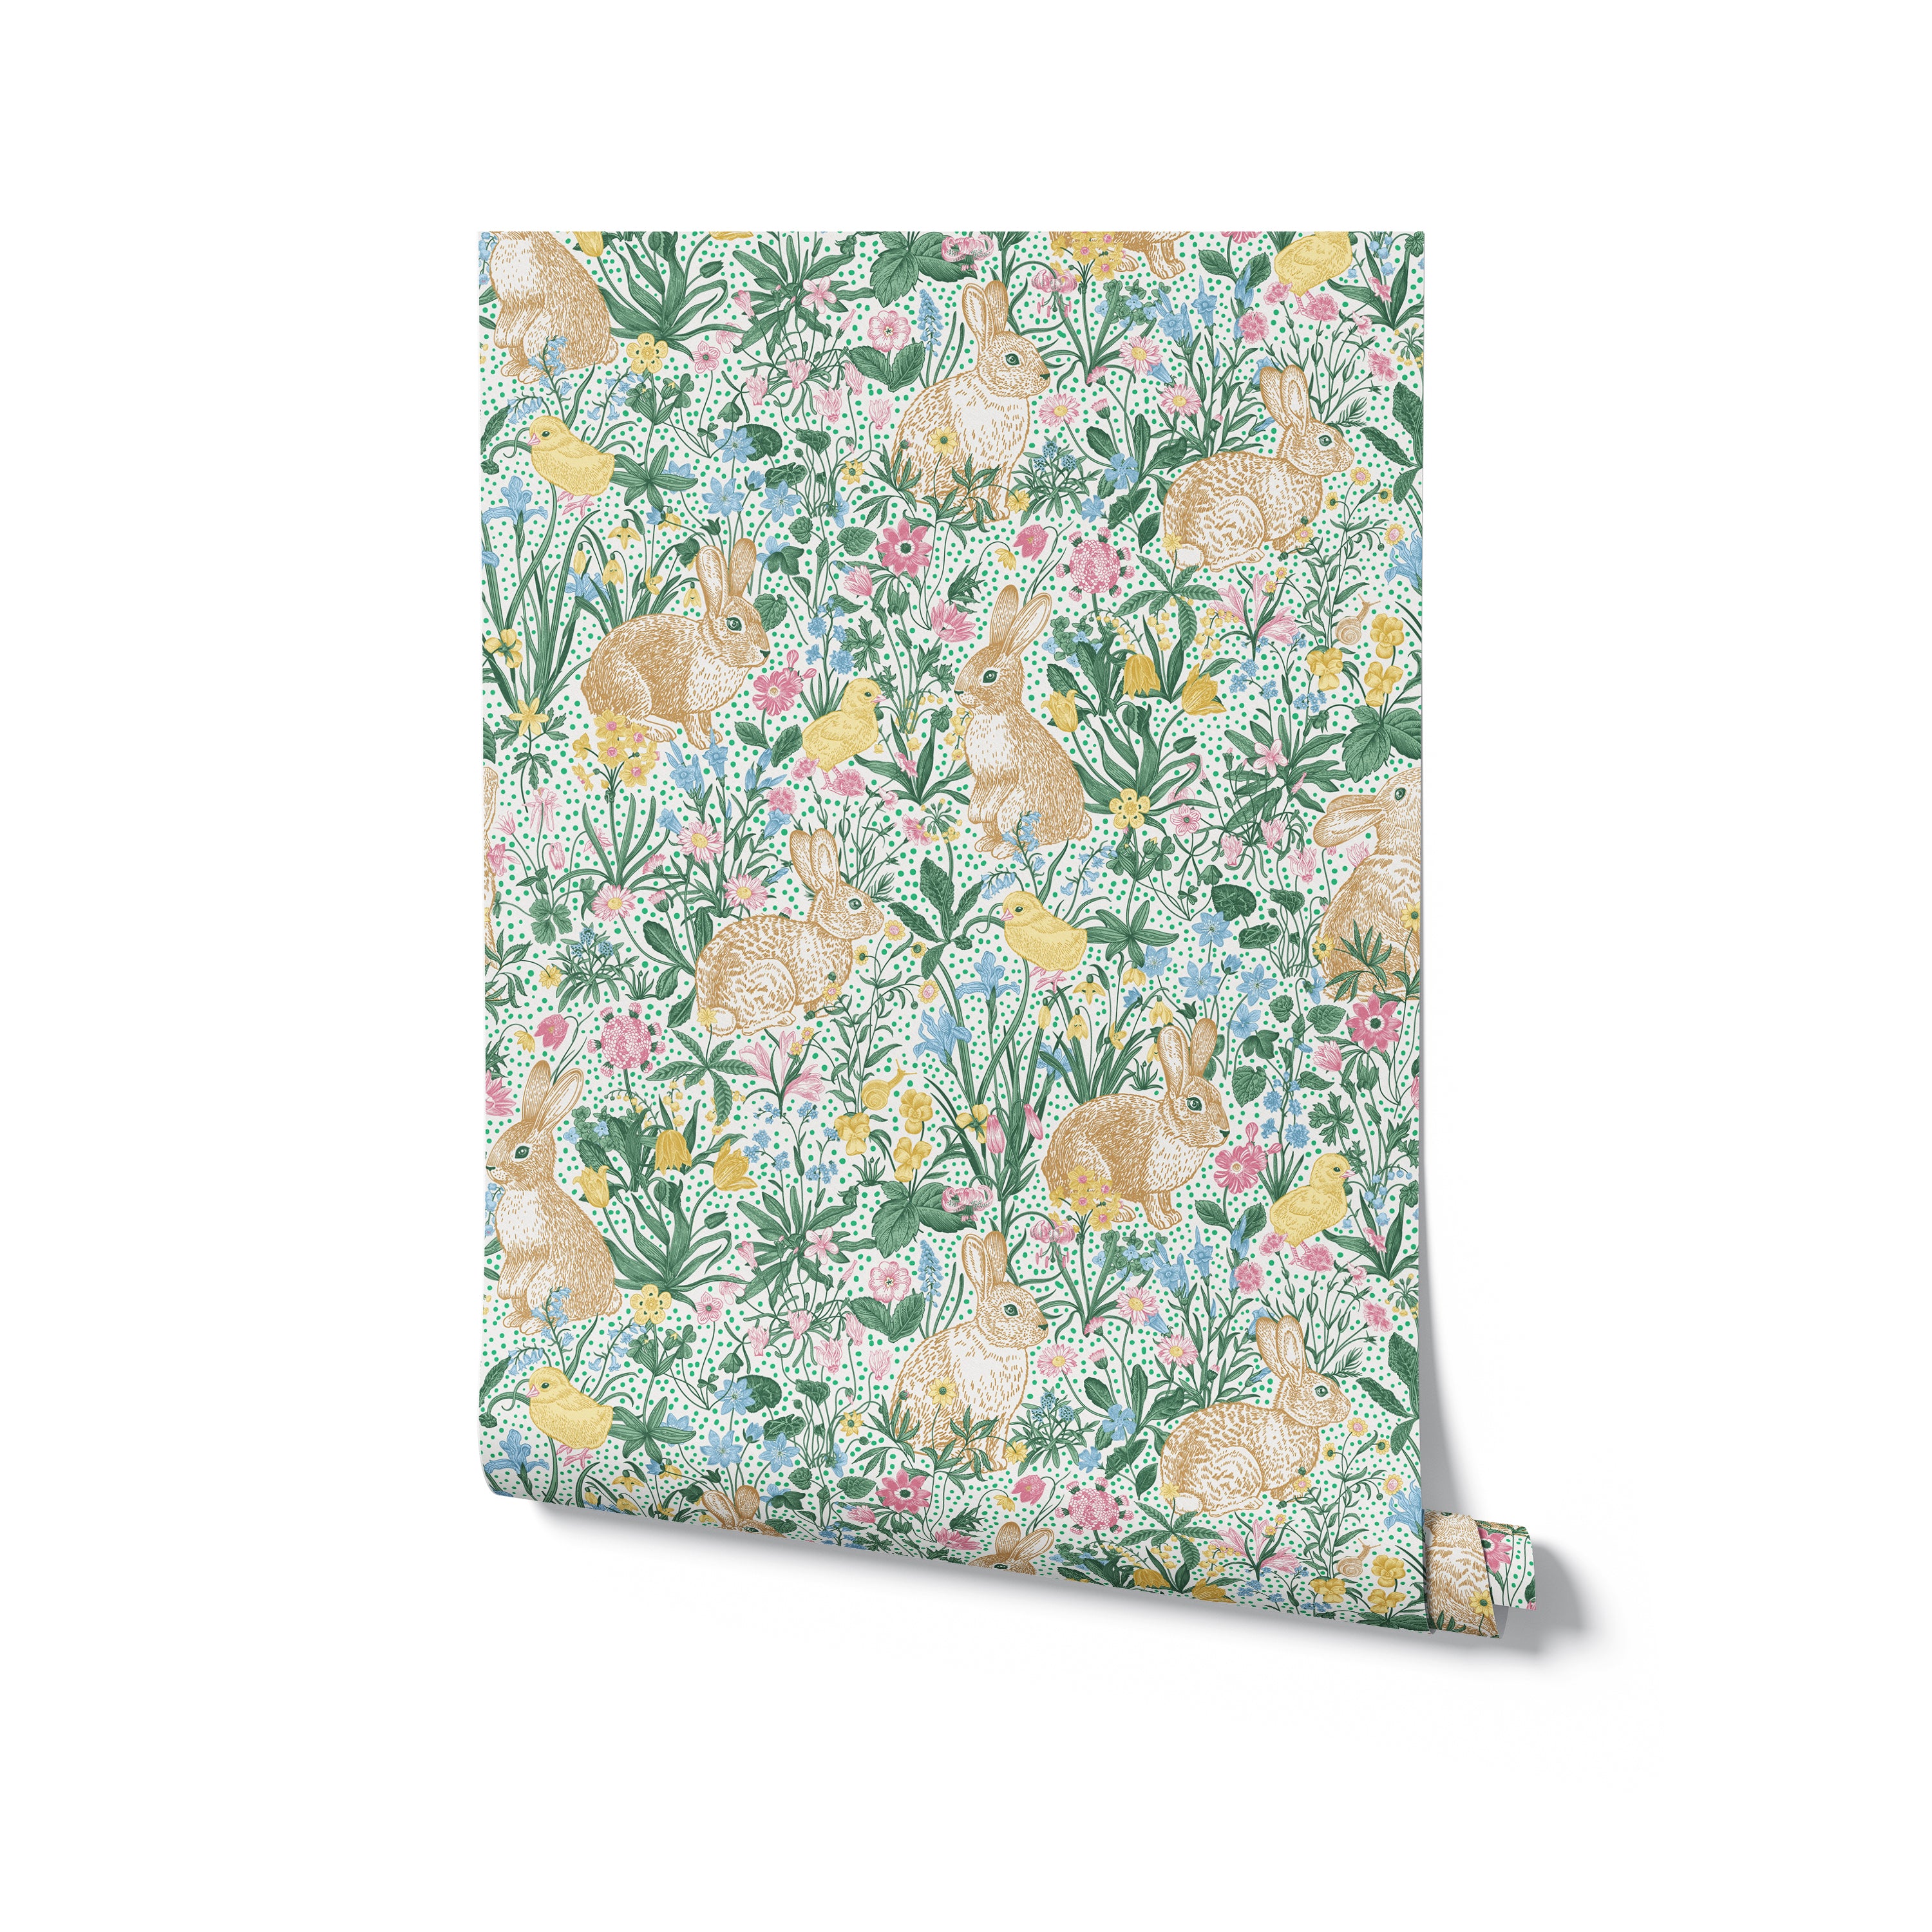 vibrant children's wallpaper depicting a lush, floral scene with rabbits and various spring flowers in soft pastel colors.